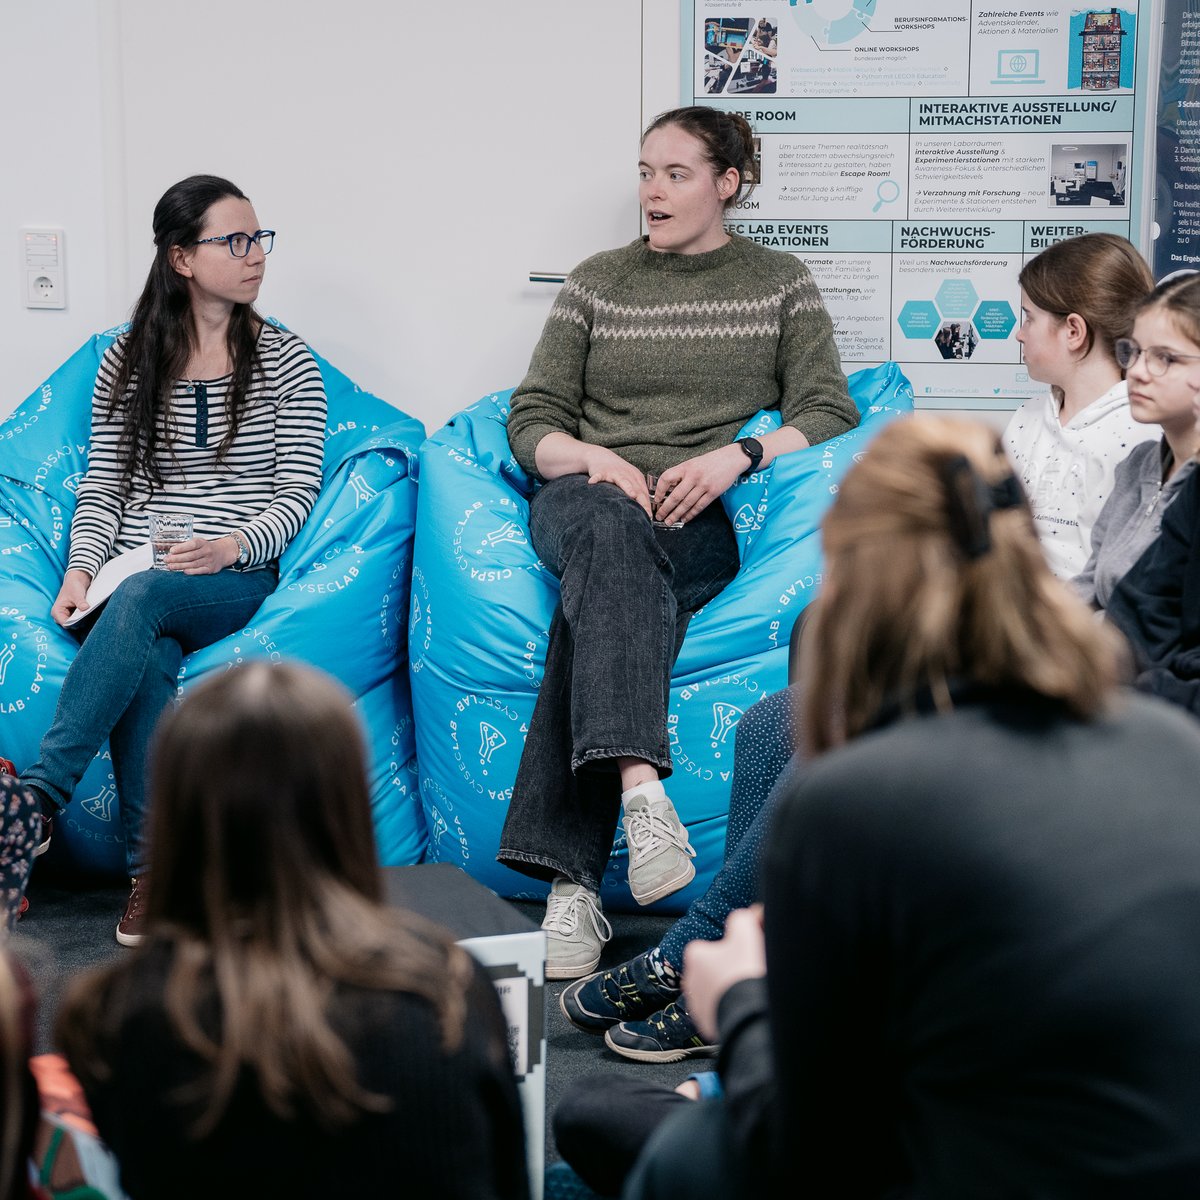 On Girls Day 2024, CISPA researchers Dr. @AuroreFass and Anne Müller highlighted a career in cybersecurity as a viable option to almost 50 schoolgirls at an event organized by @cispacyseclab. More info here: cispa.de/en/girlsday2024